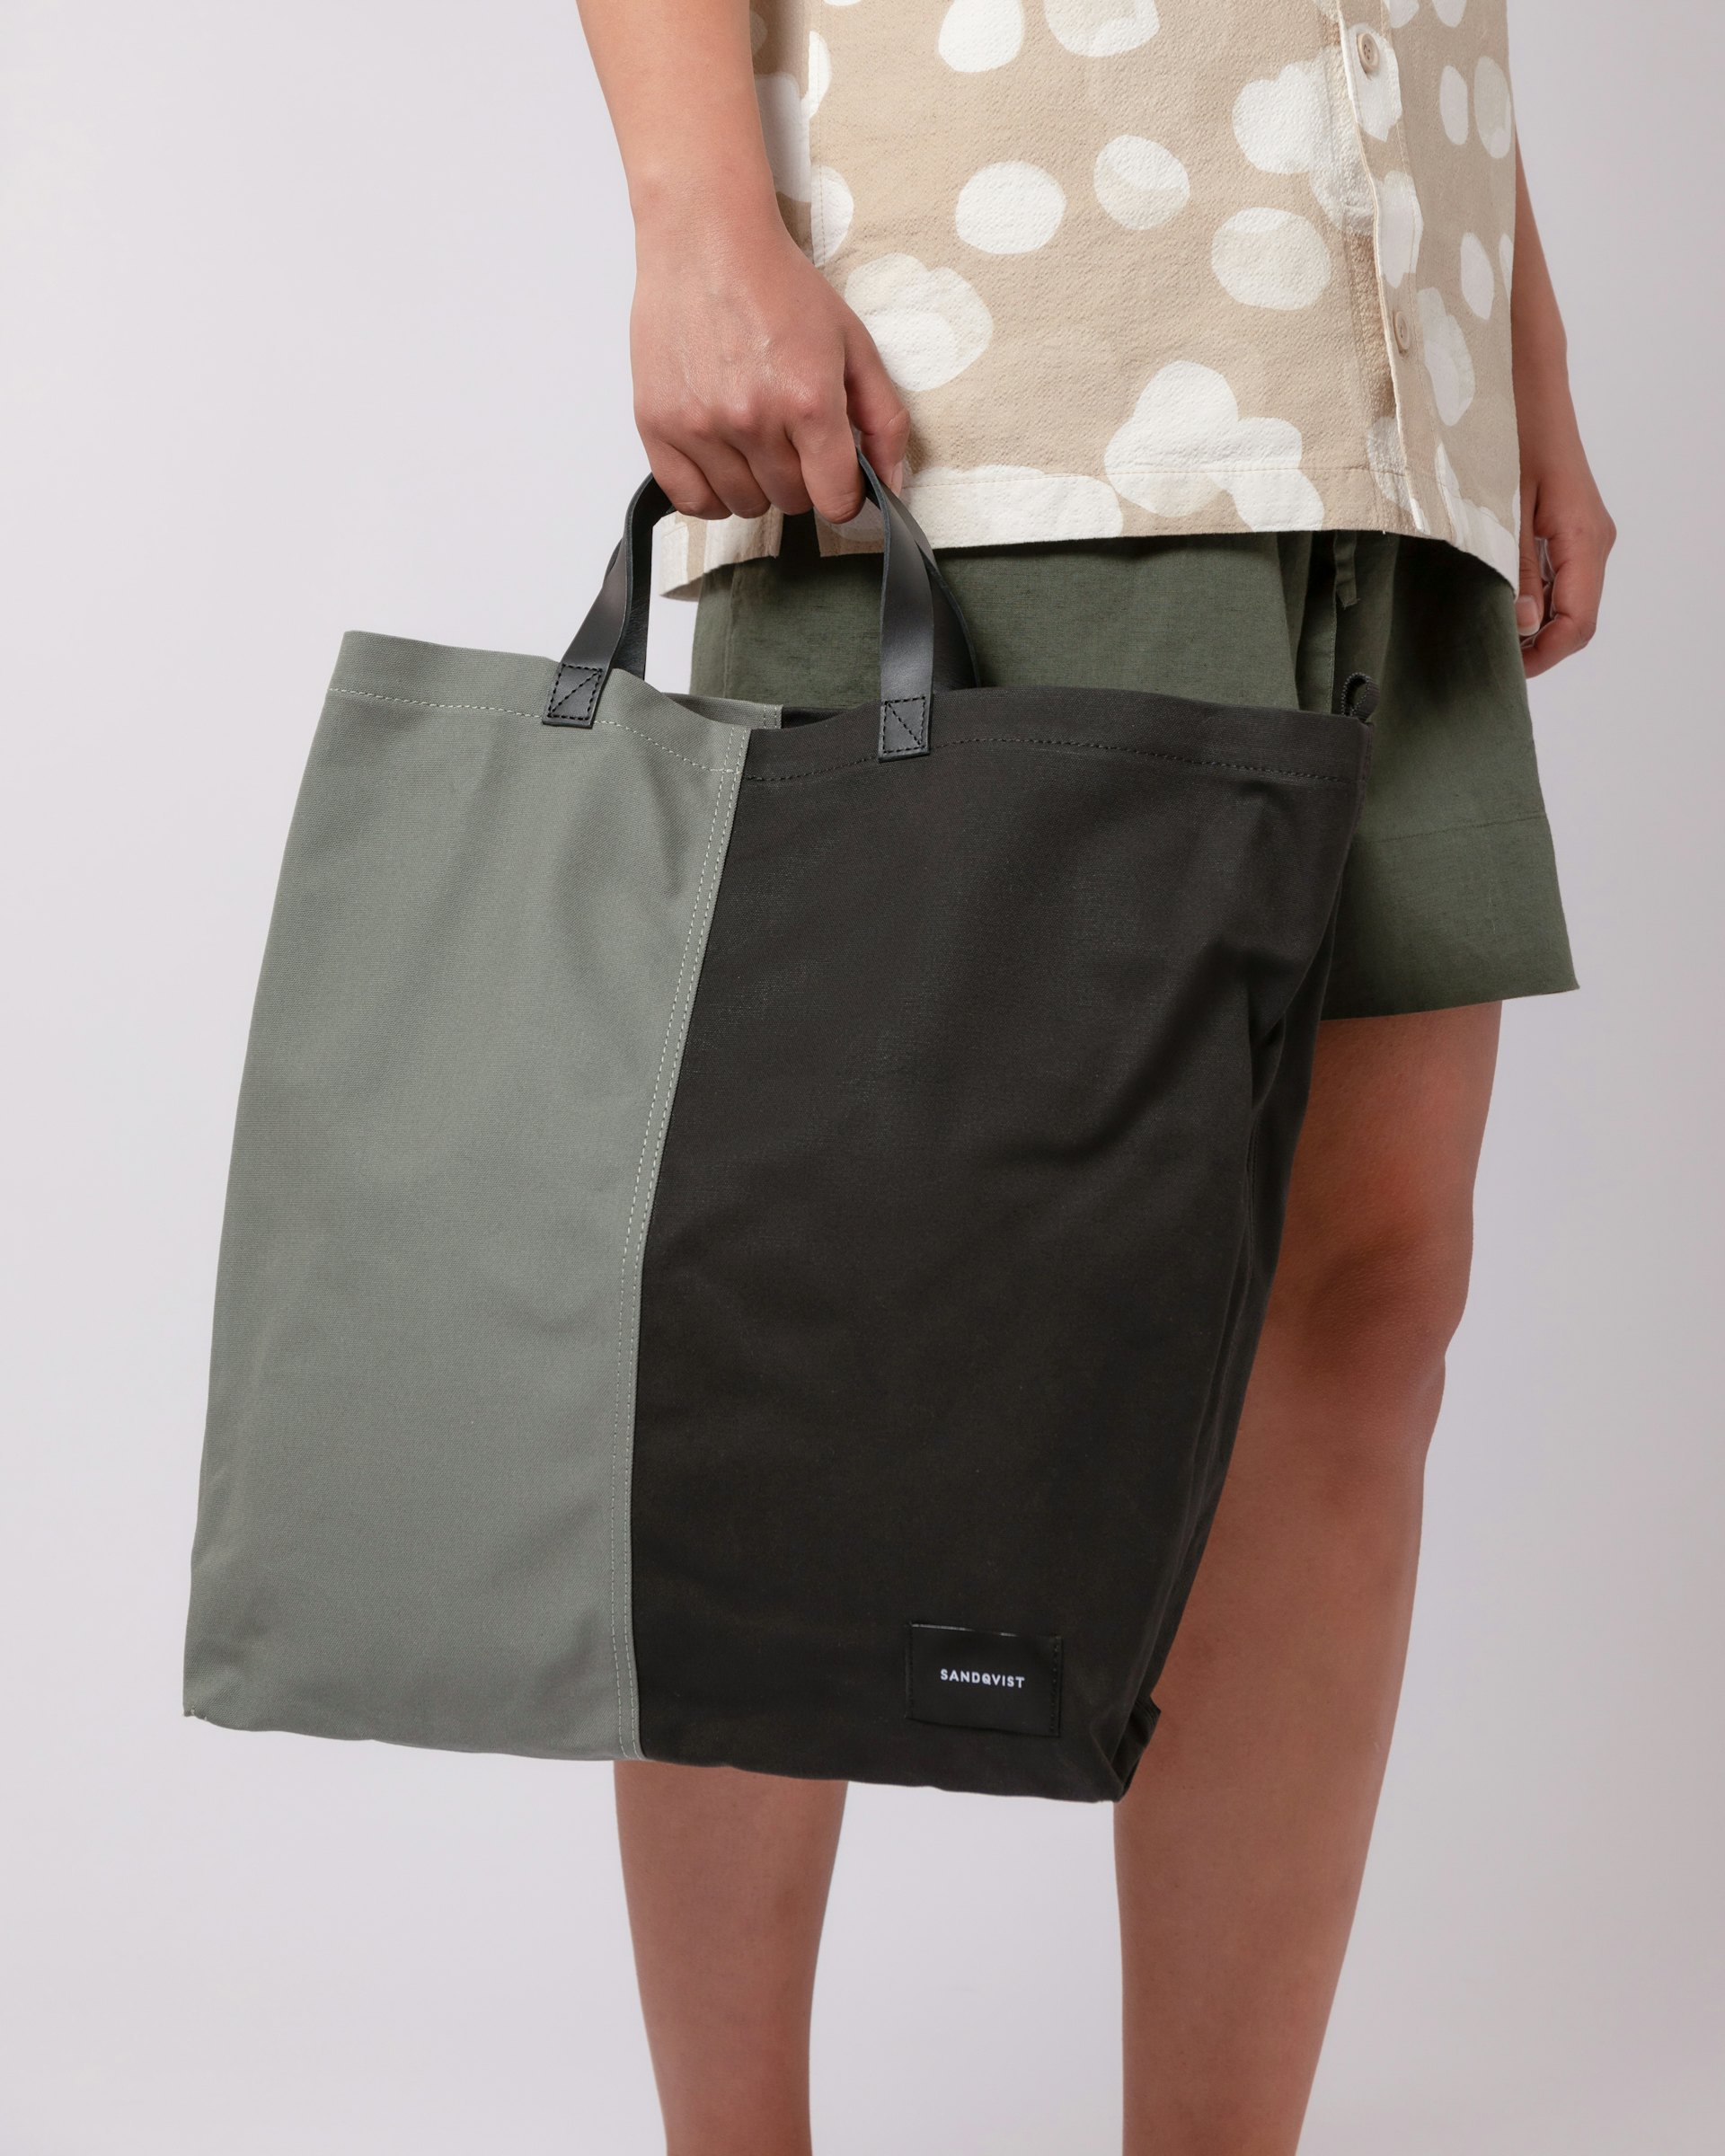 Frankie belongs to the category Tote bags and is in color black & dusty green (7 of 7)